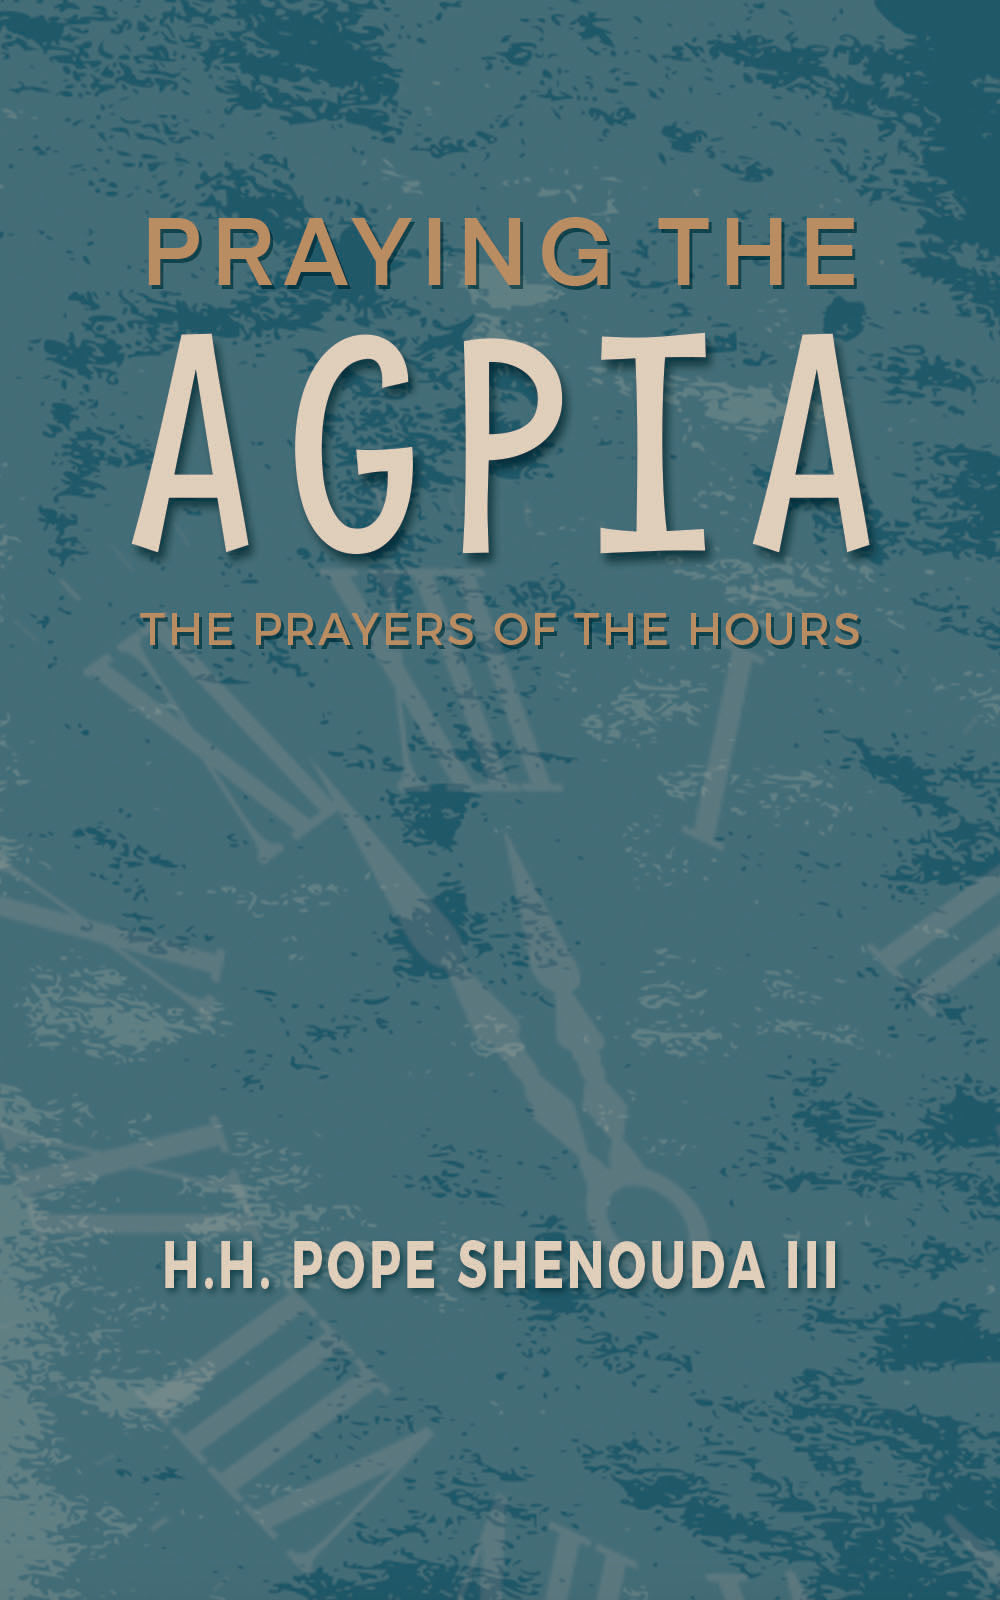 Praying the Agpia (The Prayer's of the Hours): St Shenouda Press- Coptic Orthodox Store